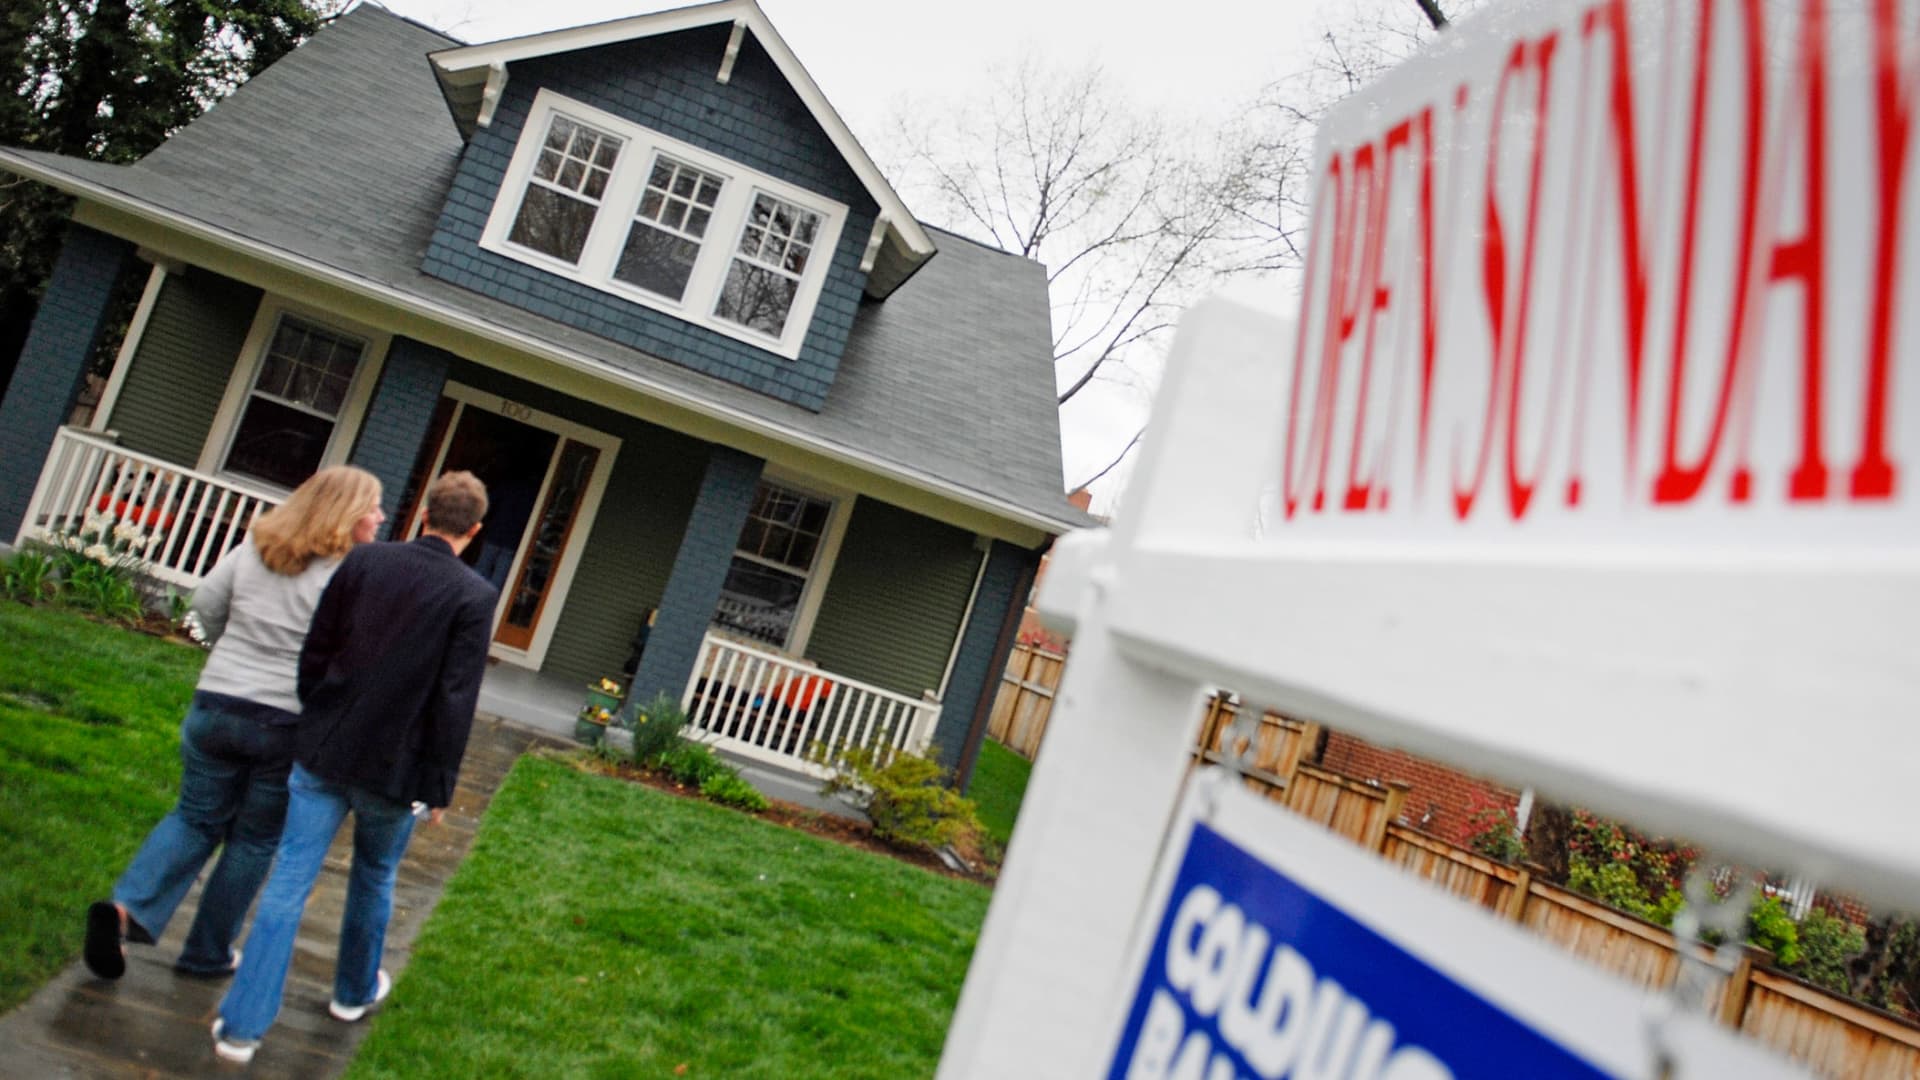 Mortgage rates near 8%, an 'inventory crisis': Homebuyers face a 'tricky' market, expert says